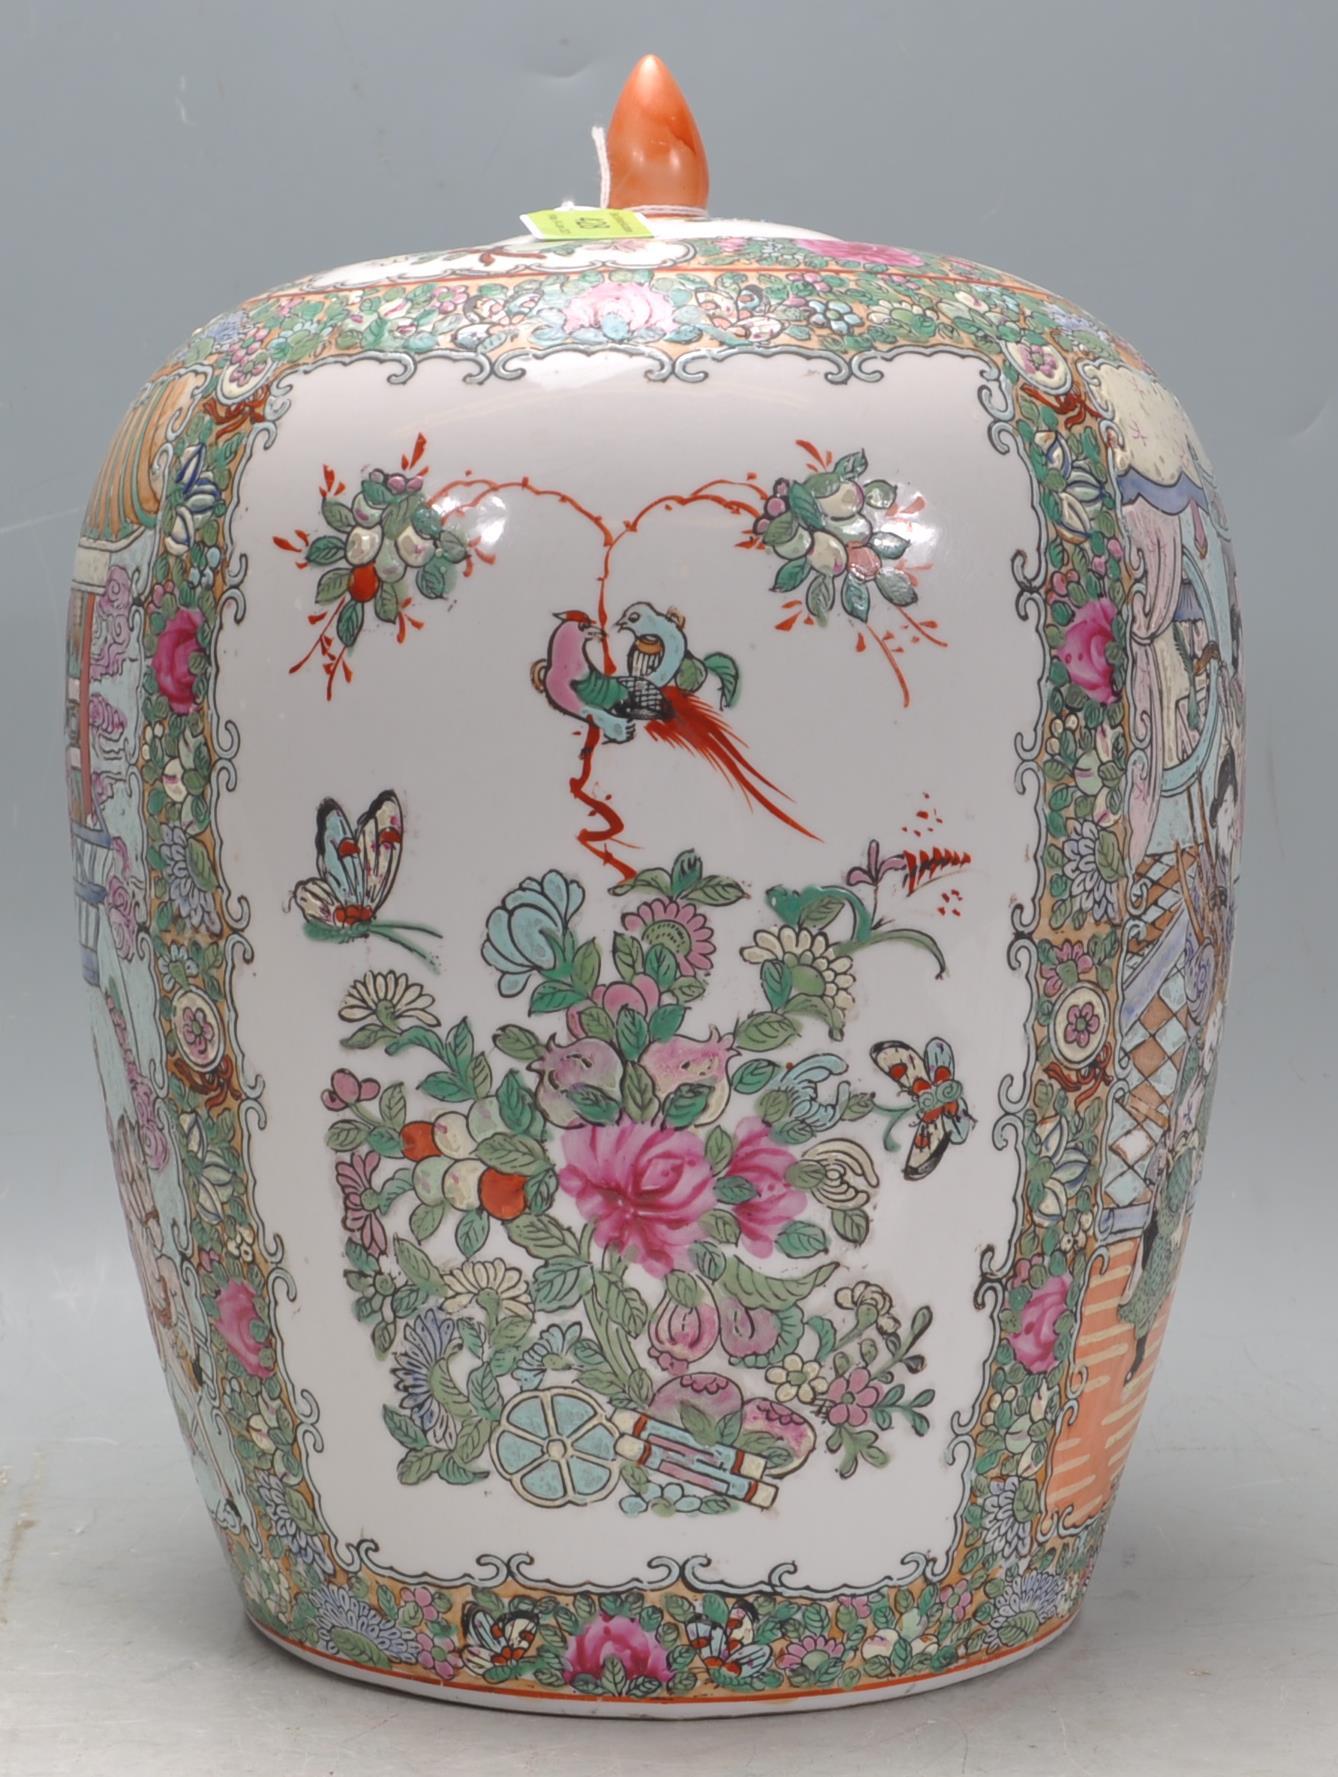 19TH CENTURY ANTIQUE CHINESE ORIENTAL FAMILLE ROSE GINGER JAR - Image 4 of 8